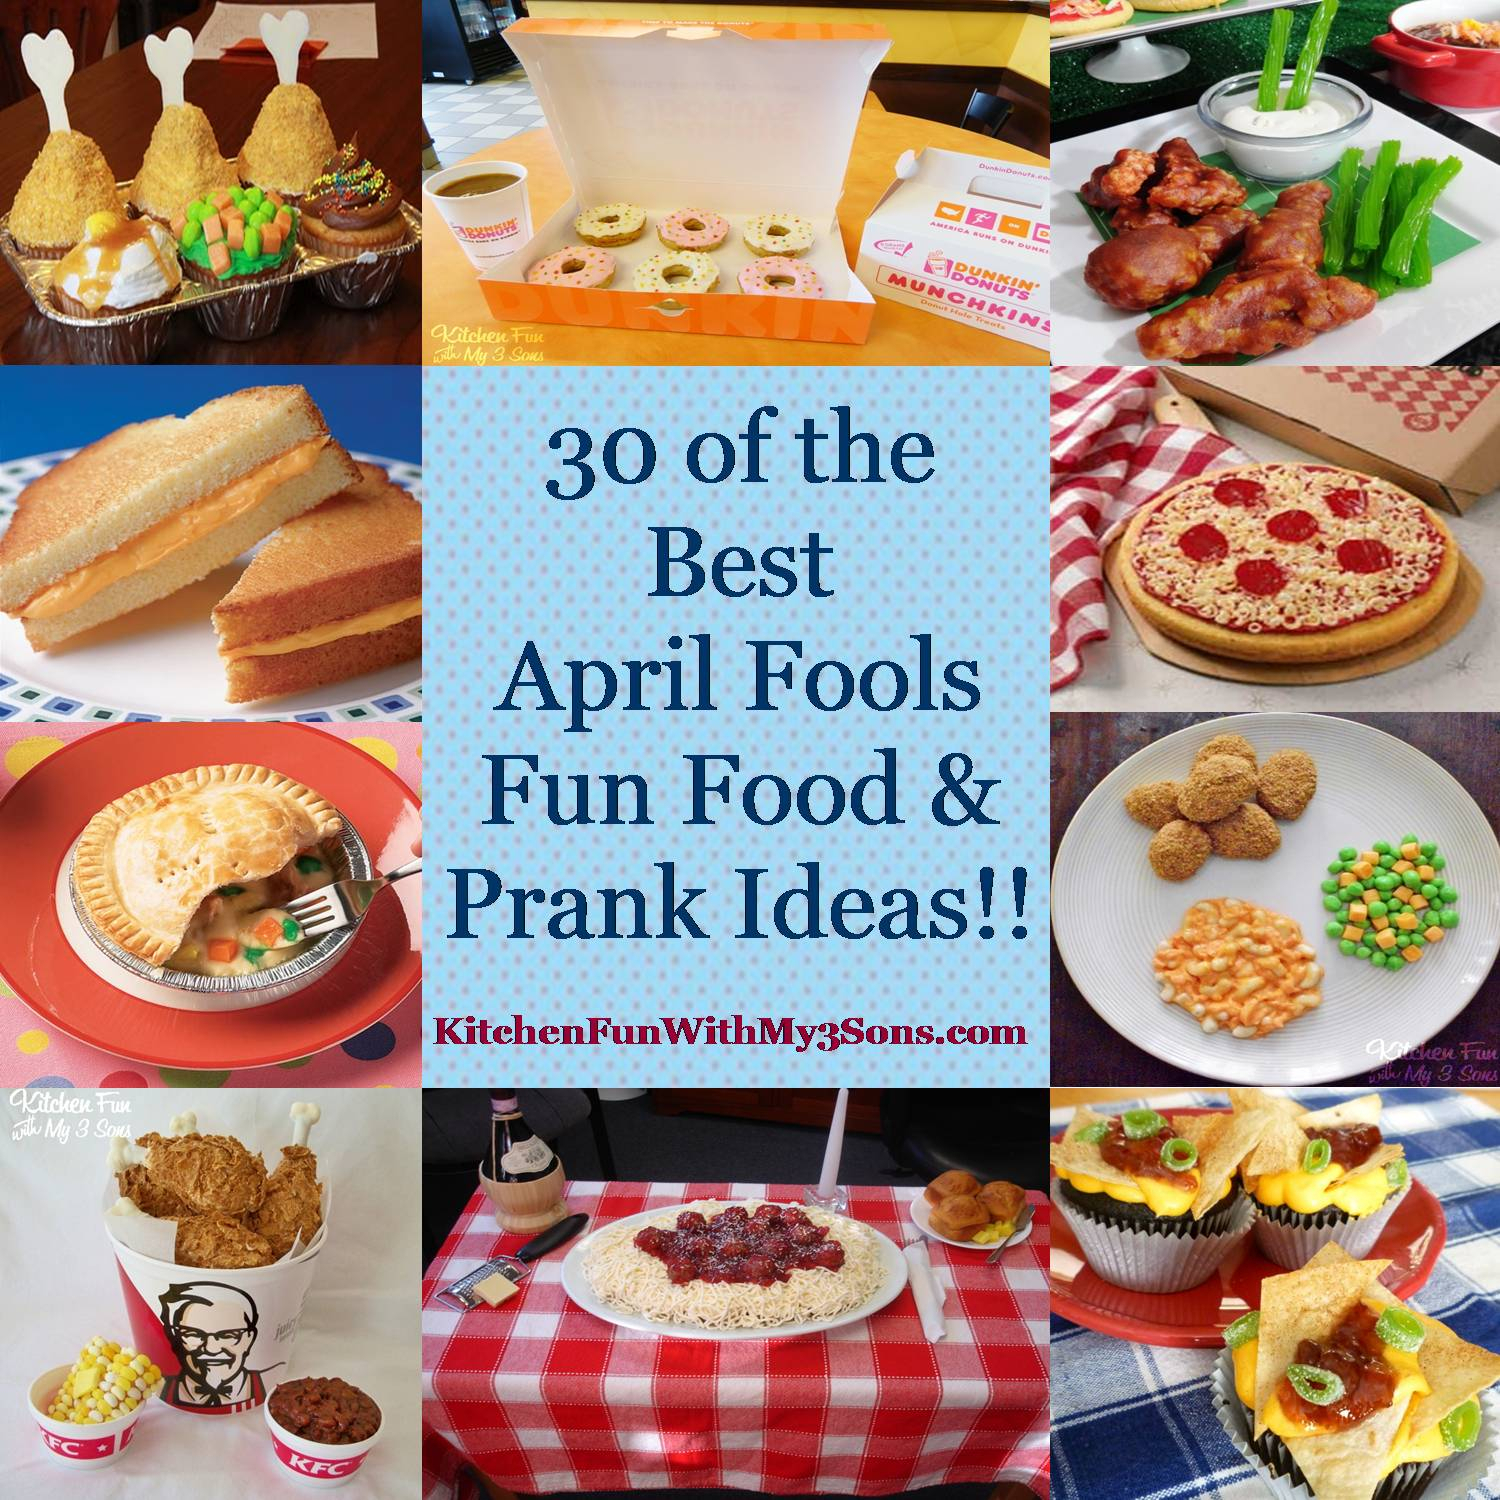 10 Attractive Best April Fools Prank Ideas 30 of the best april fools fun food prank ideas kitchen fun 2022